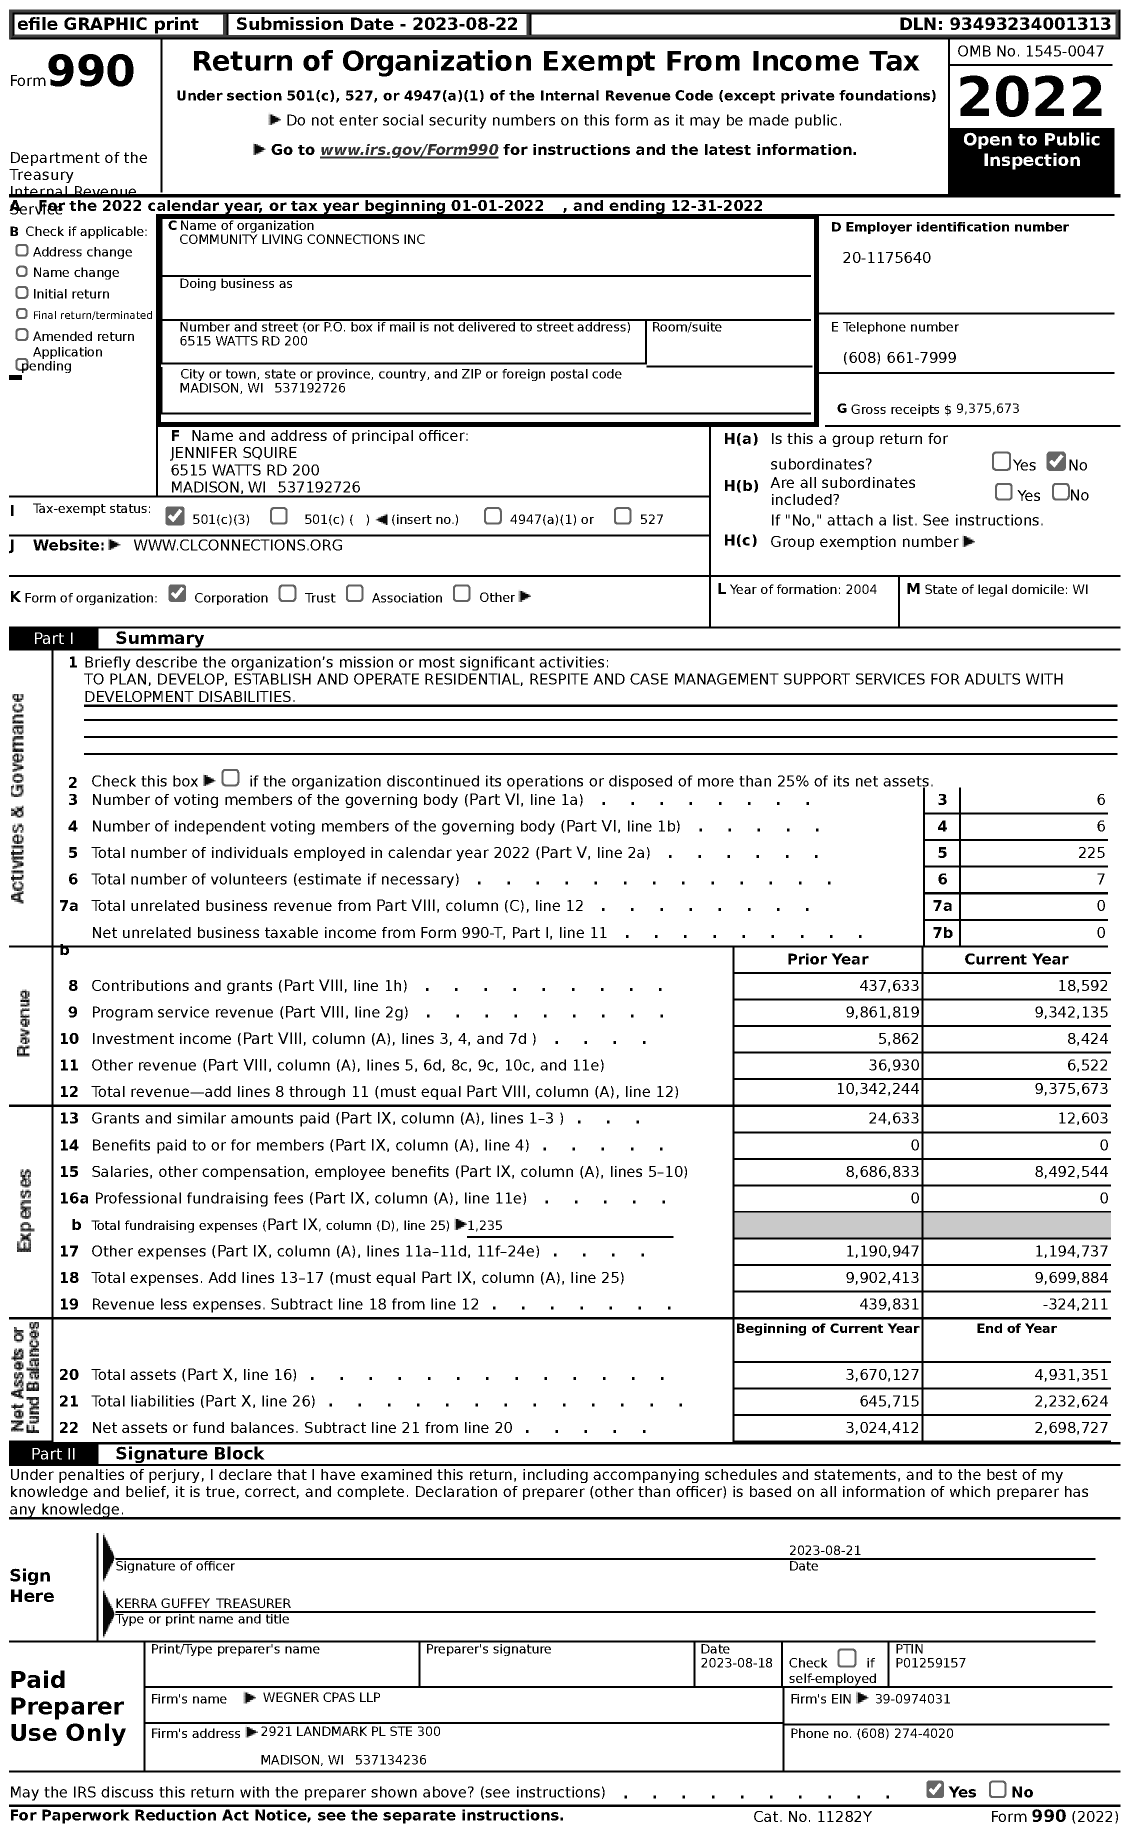 Image of first page of 2022 Form 990 for Community Living Connections Incorporated (CLC)